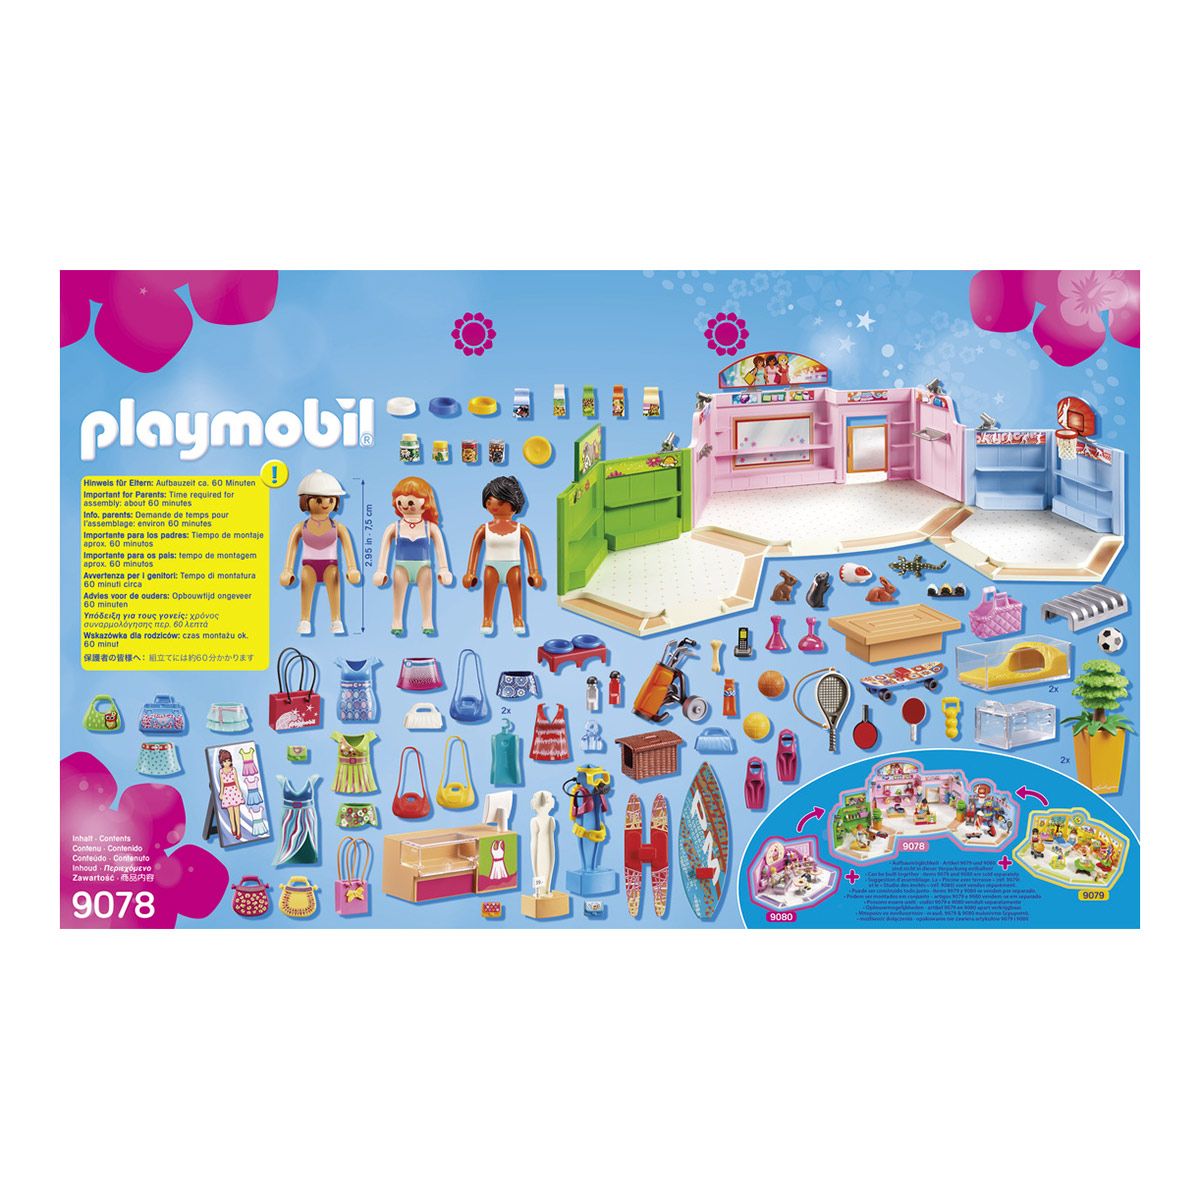 playmobil city life galerie marchande